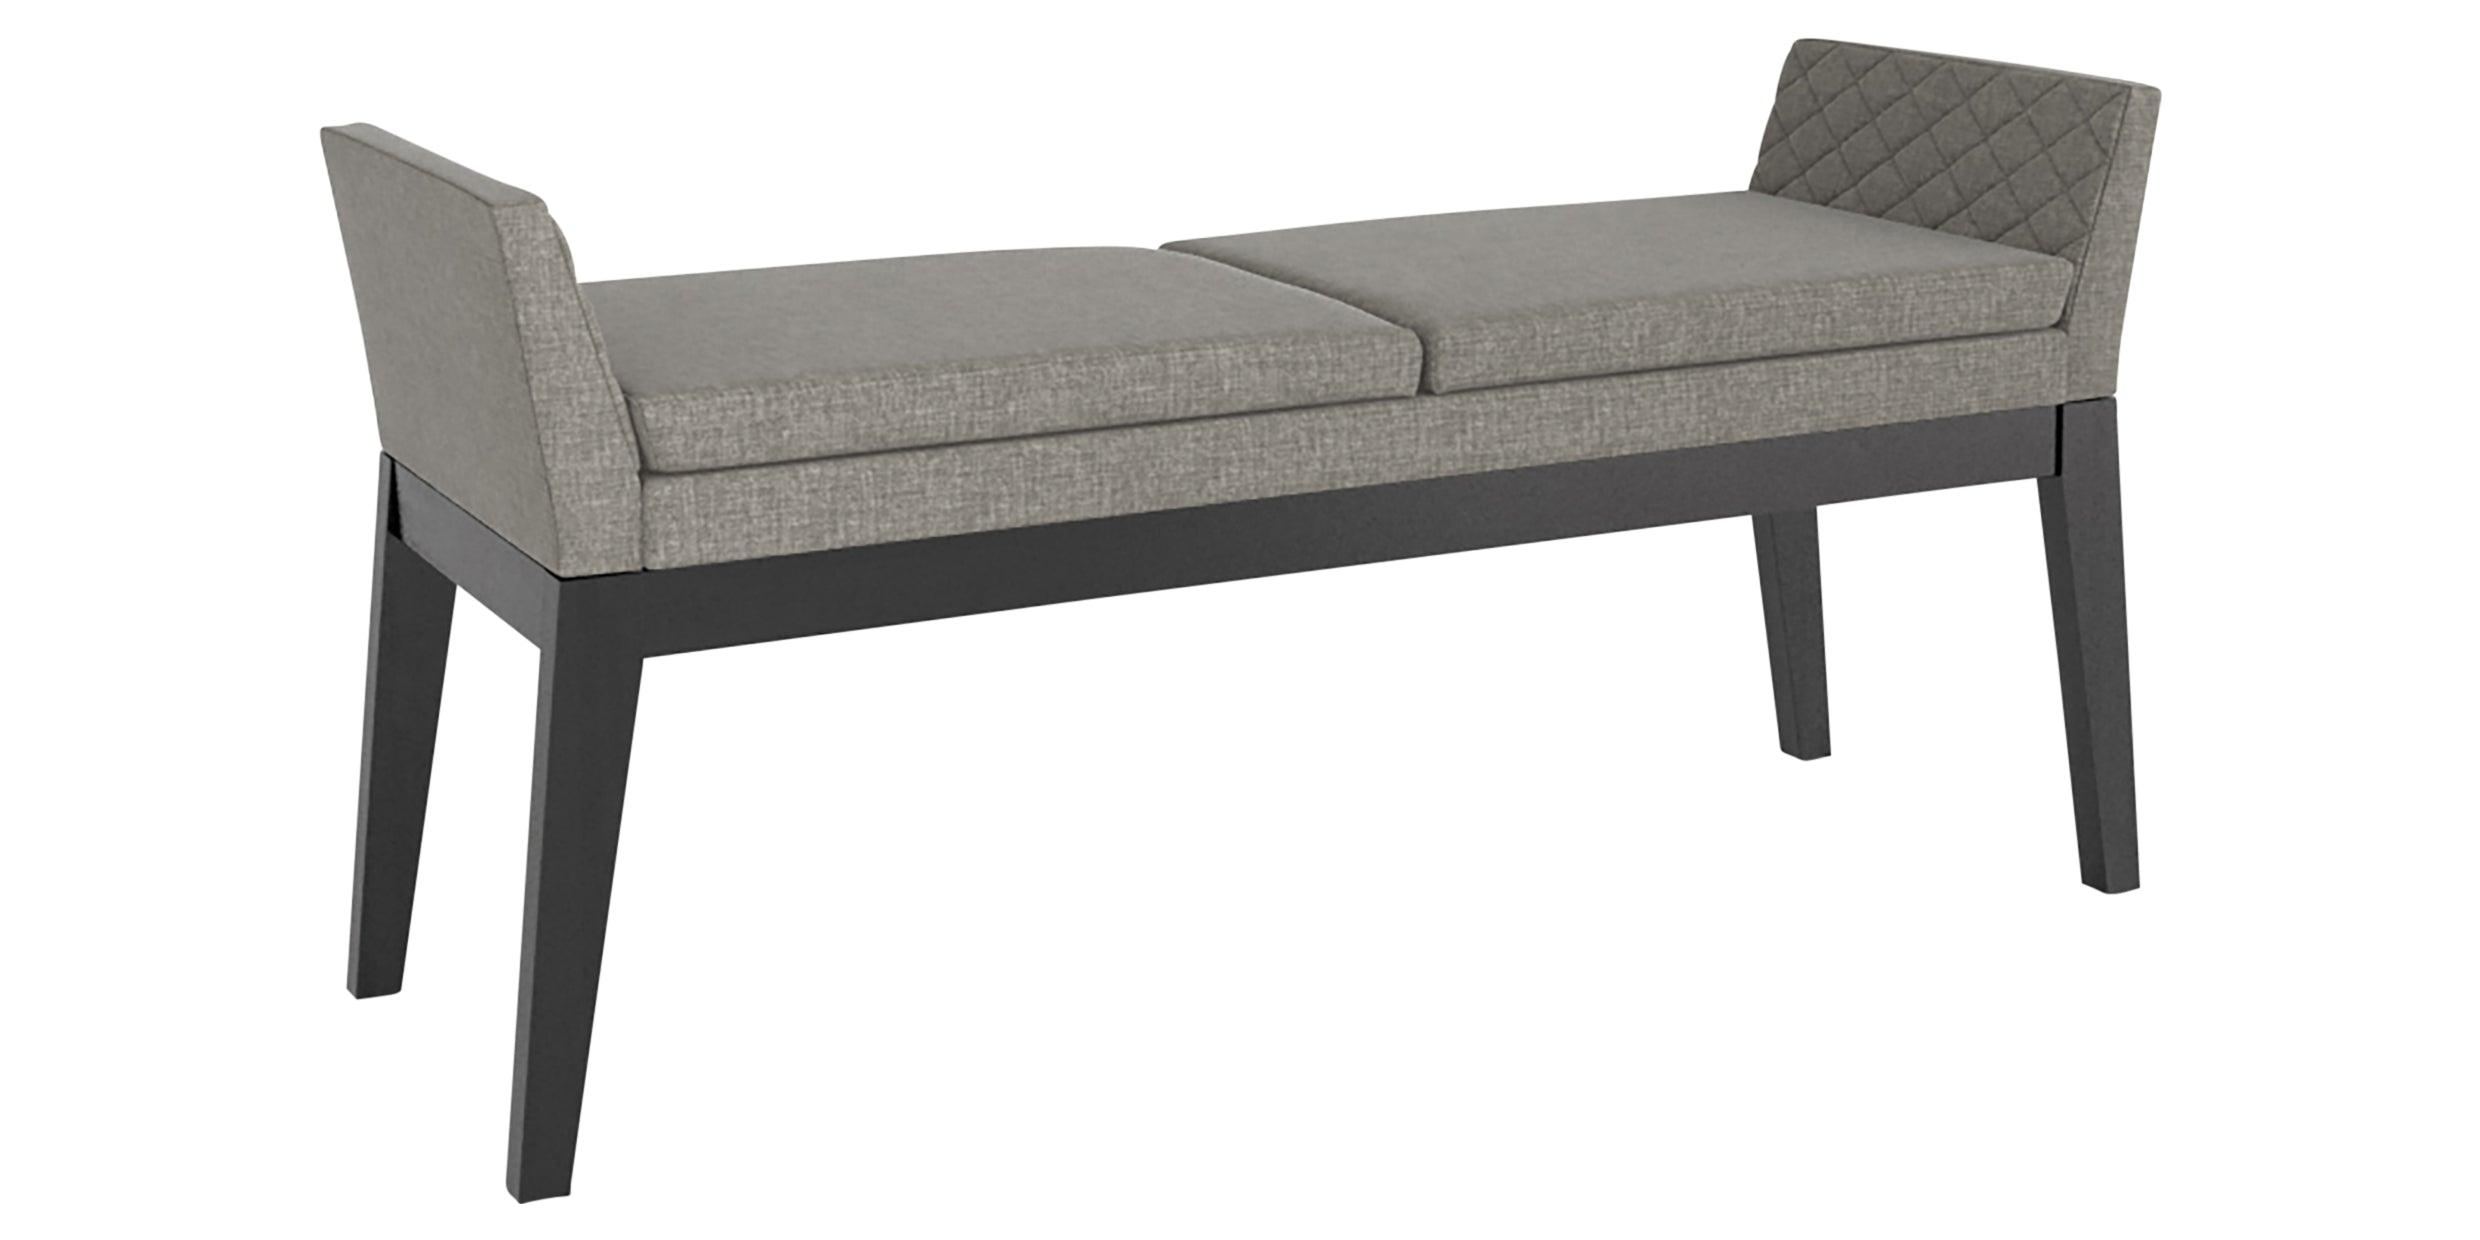 Peppercorn Washed & Fabric TN | Canadel Downtown Bench 5170 | Valley Ridge Furniture